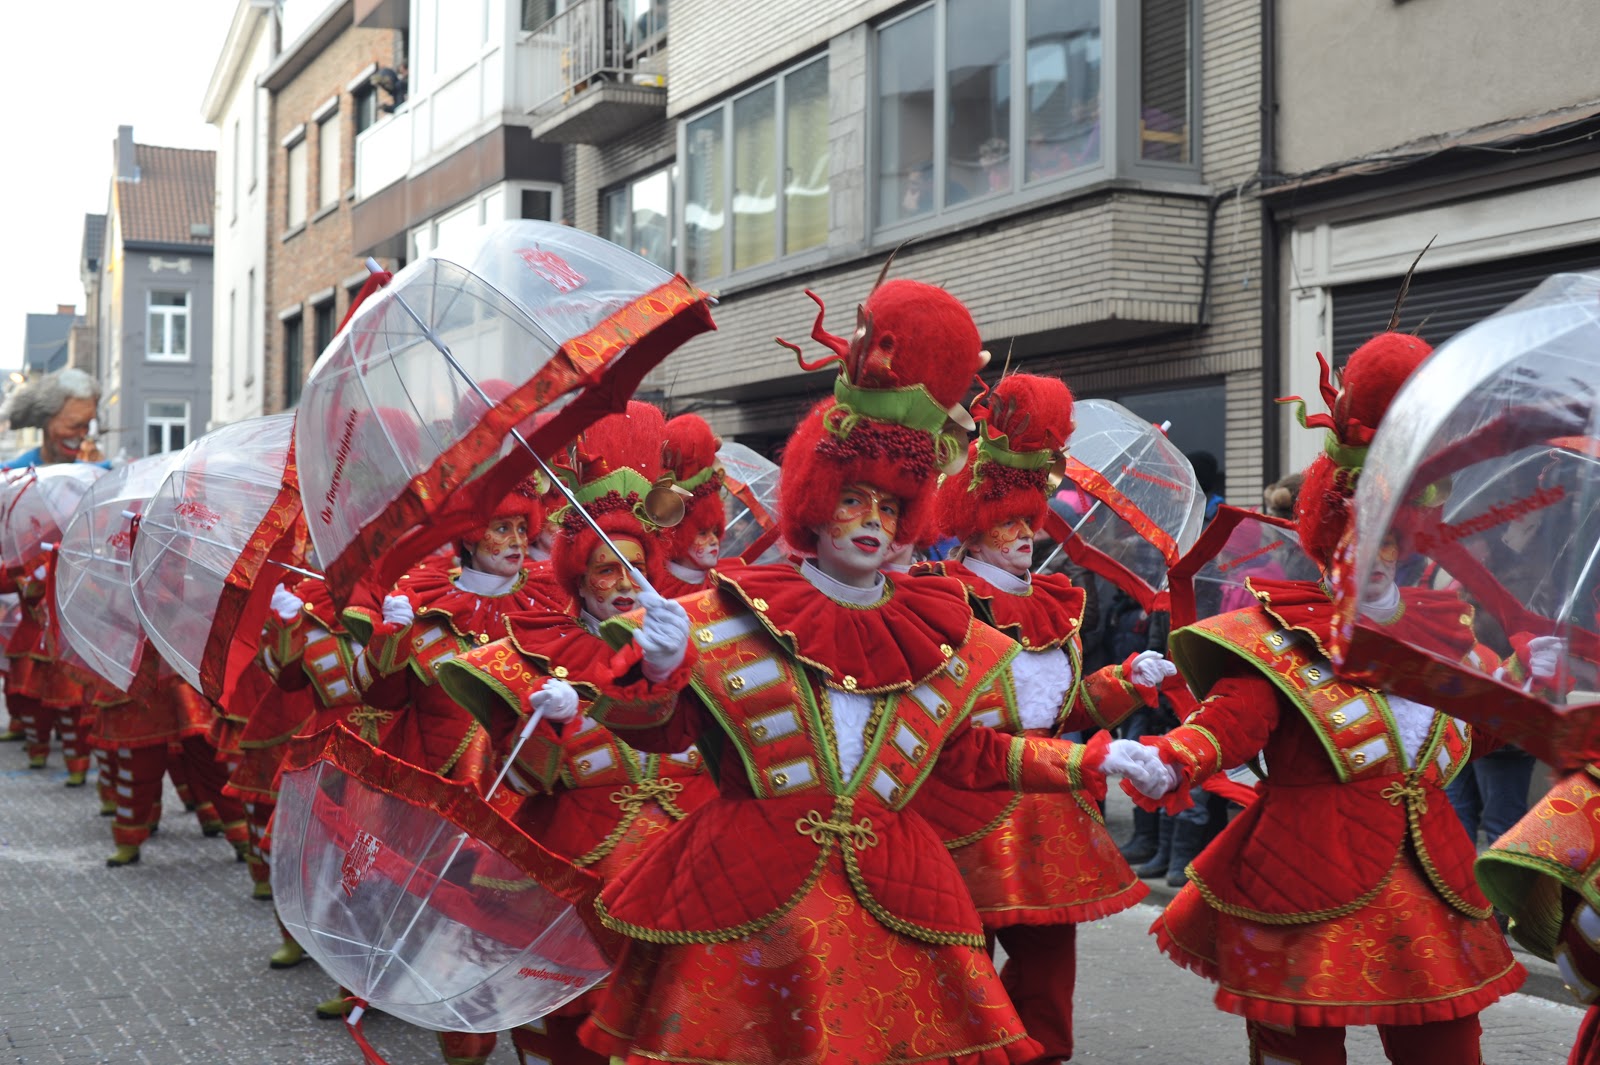 This is Belgium Carnival in Aalst